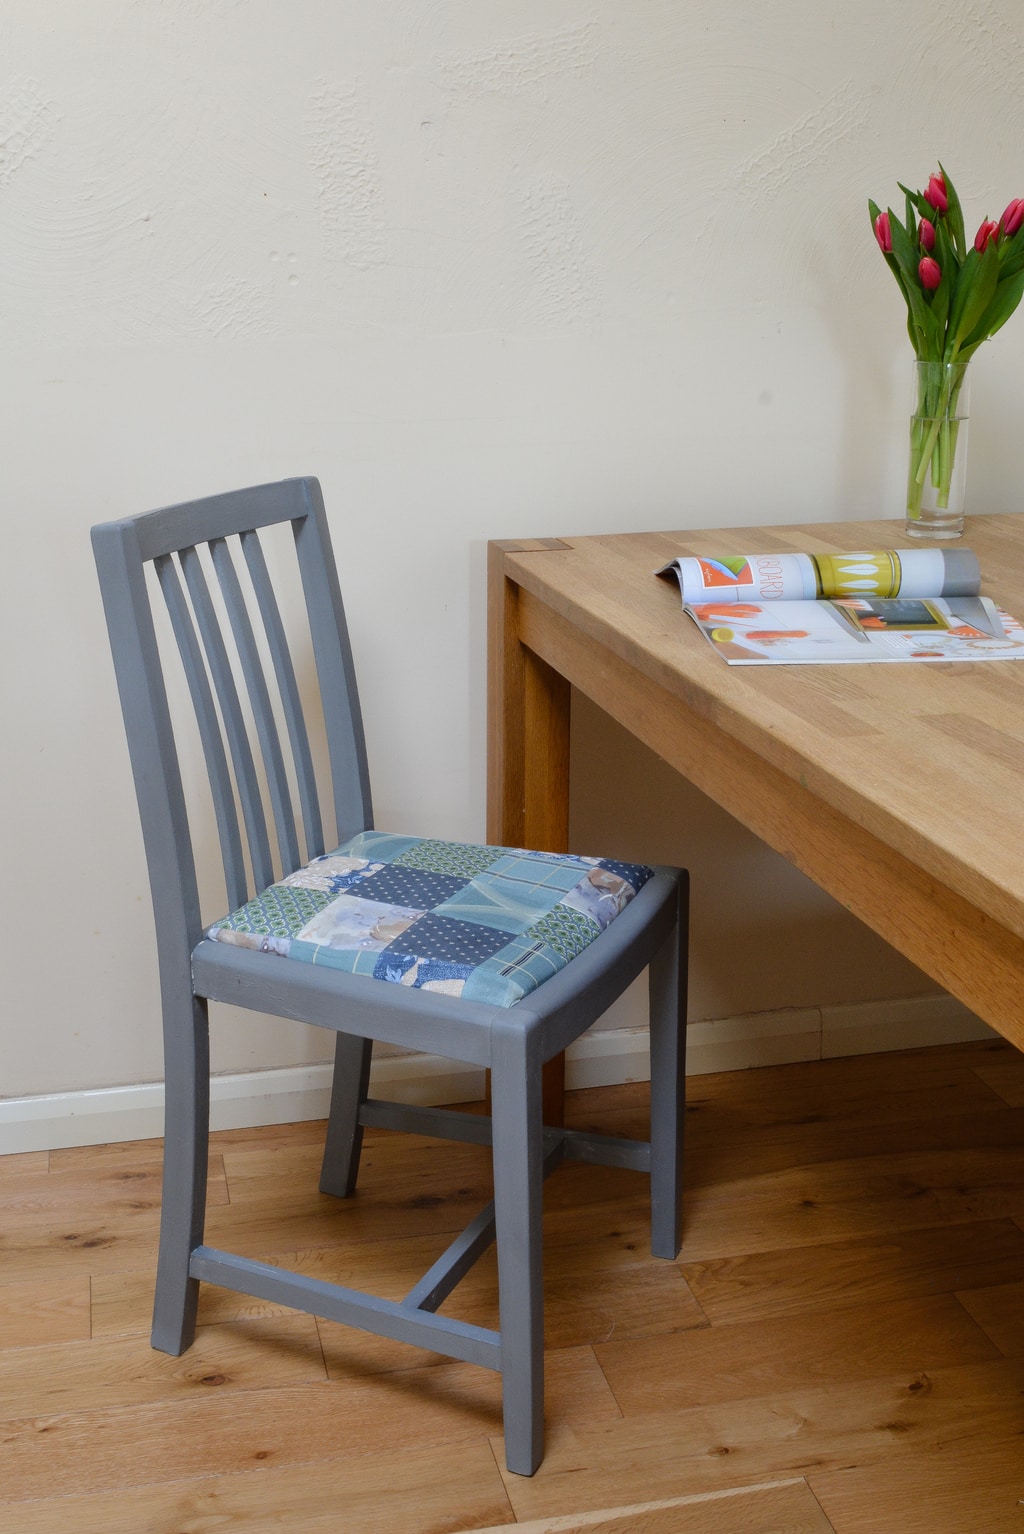 Upcycle a dining room chair - use wax to prevent stains